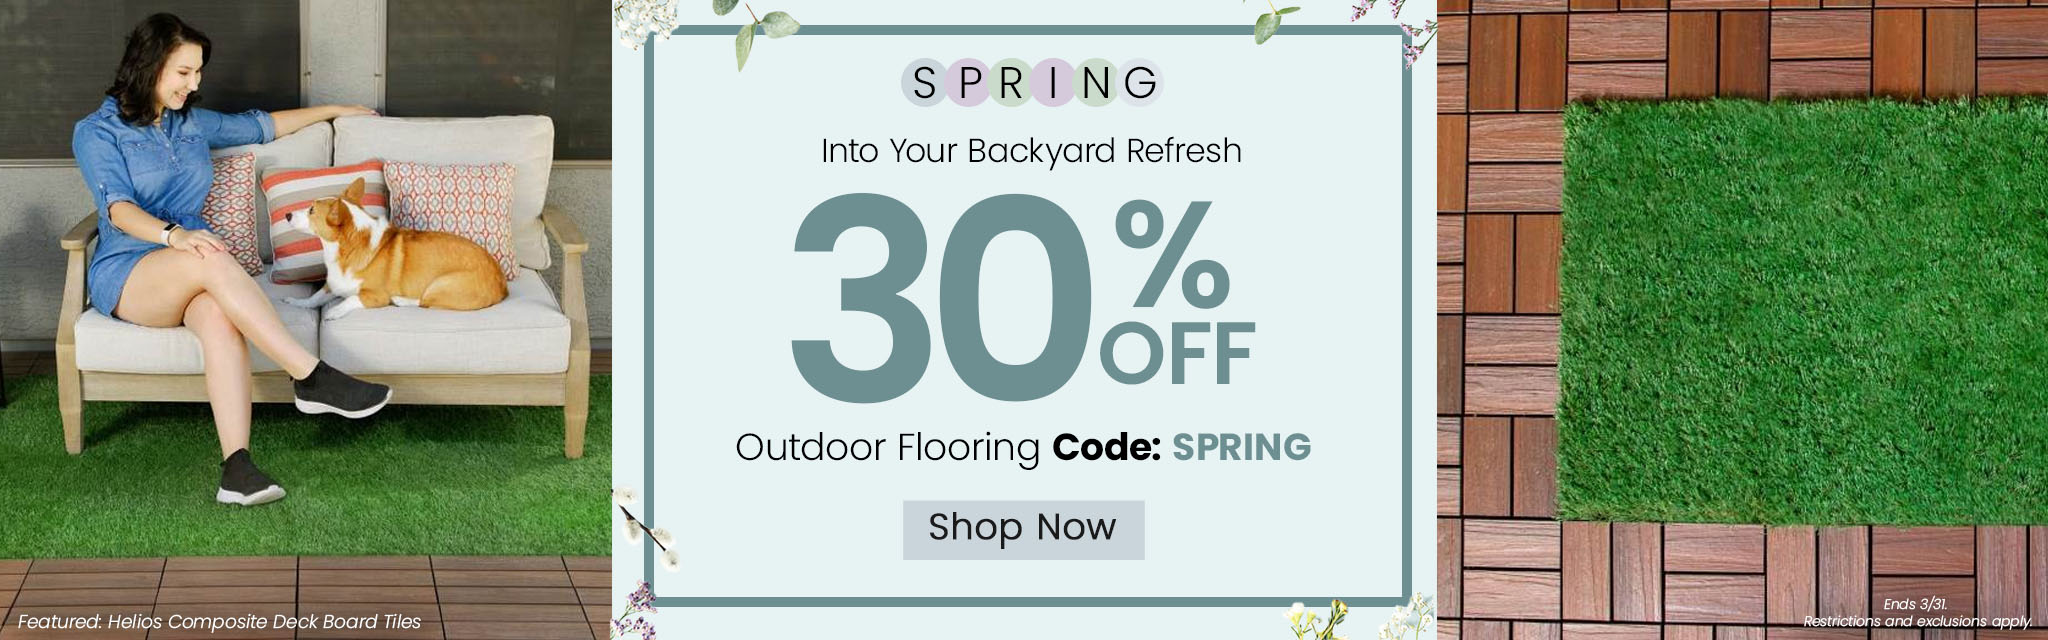 Spring Into Your Backyard Refresh! | 30% Off Outdoor Flooring | Code: SPRING | CTA: Shop Now | Ends 3/31. Restrictions and exclusions apply.